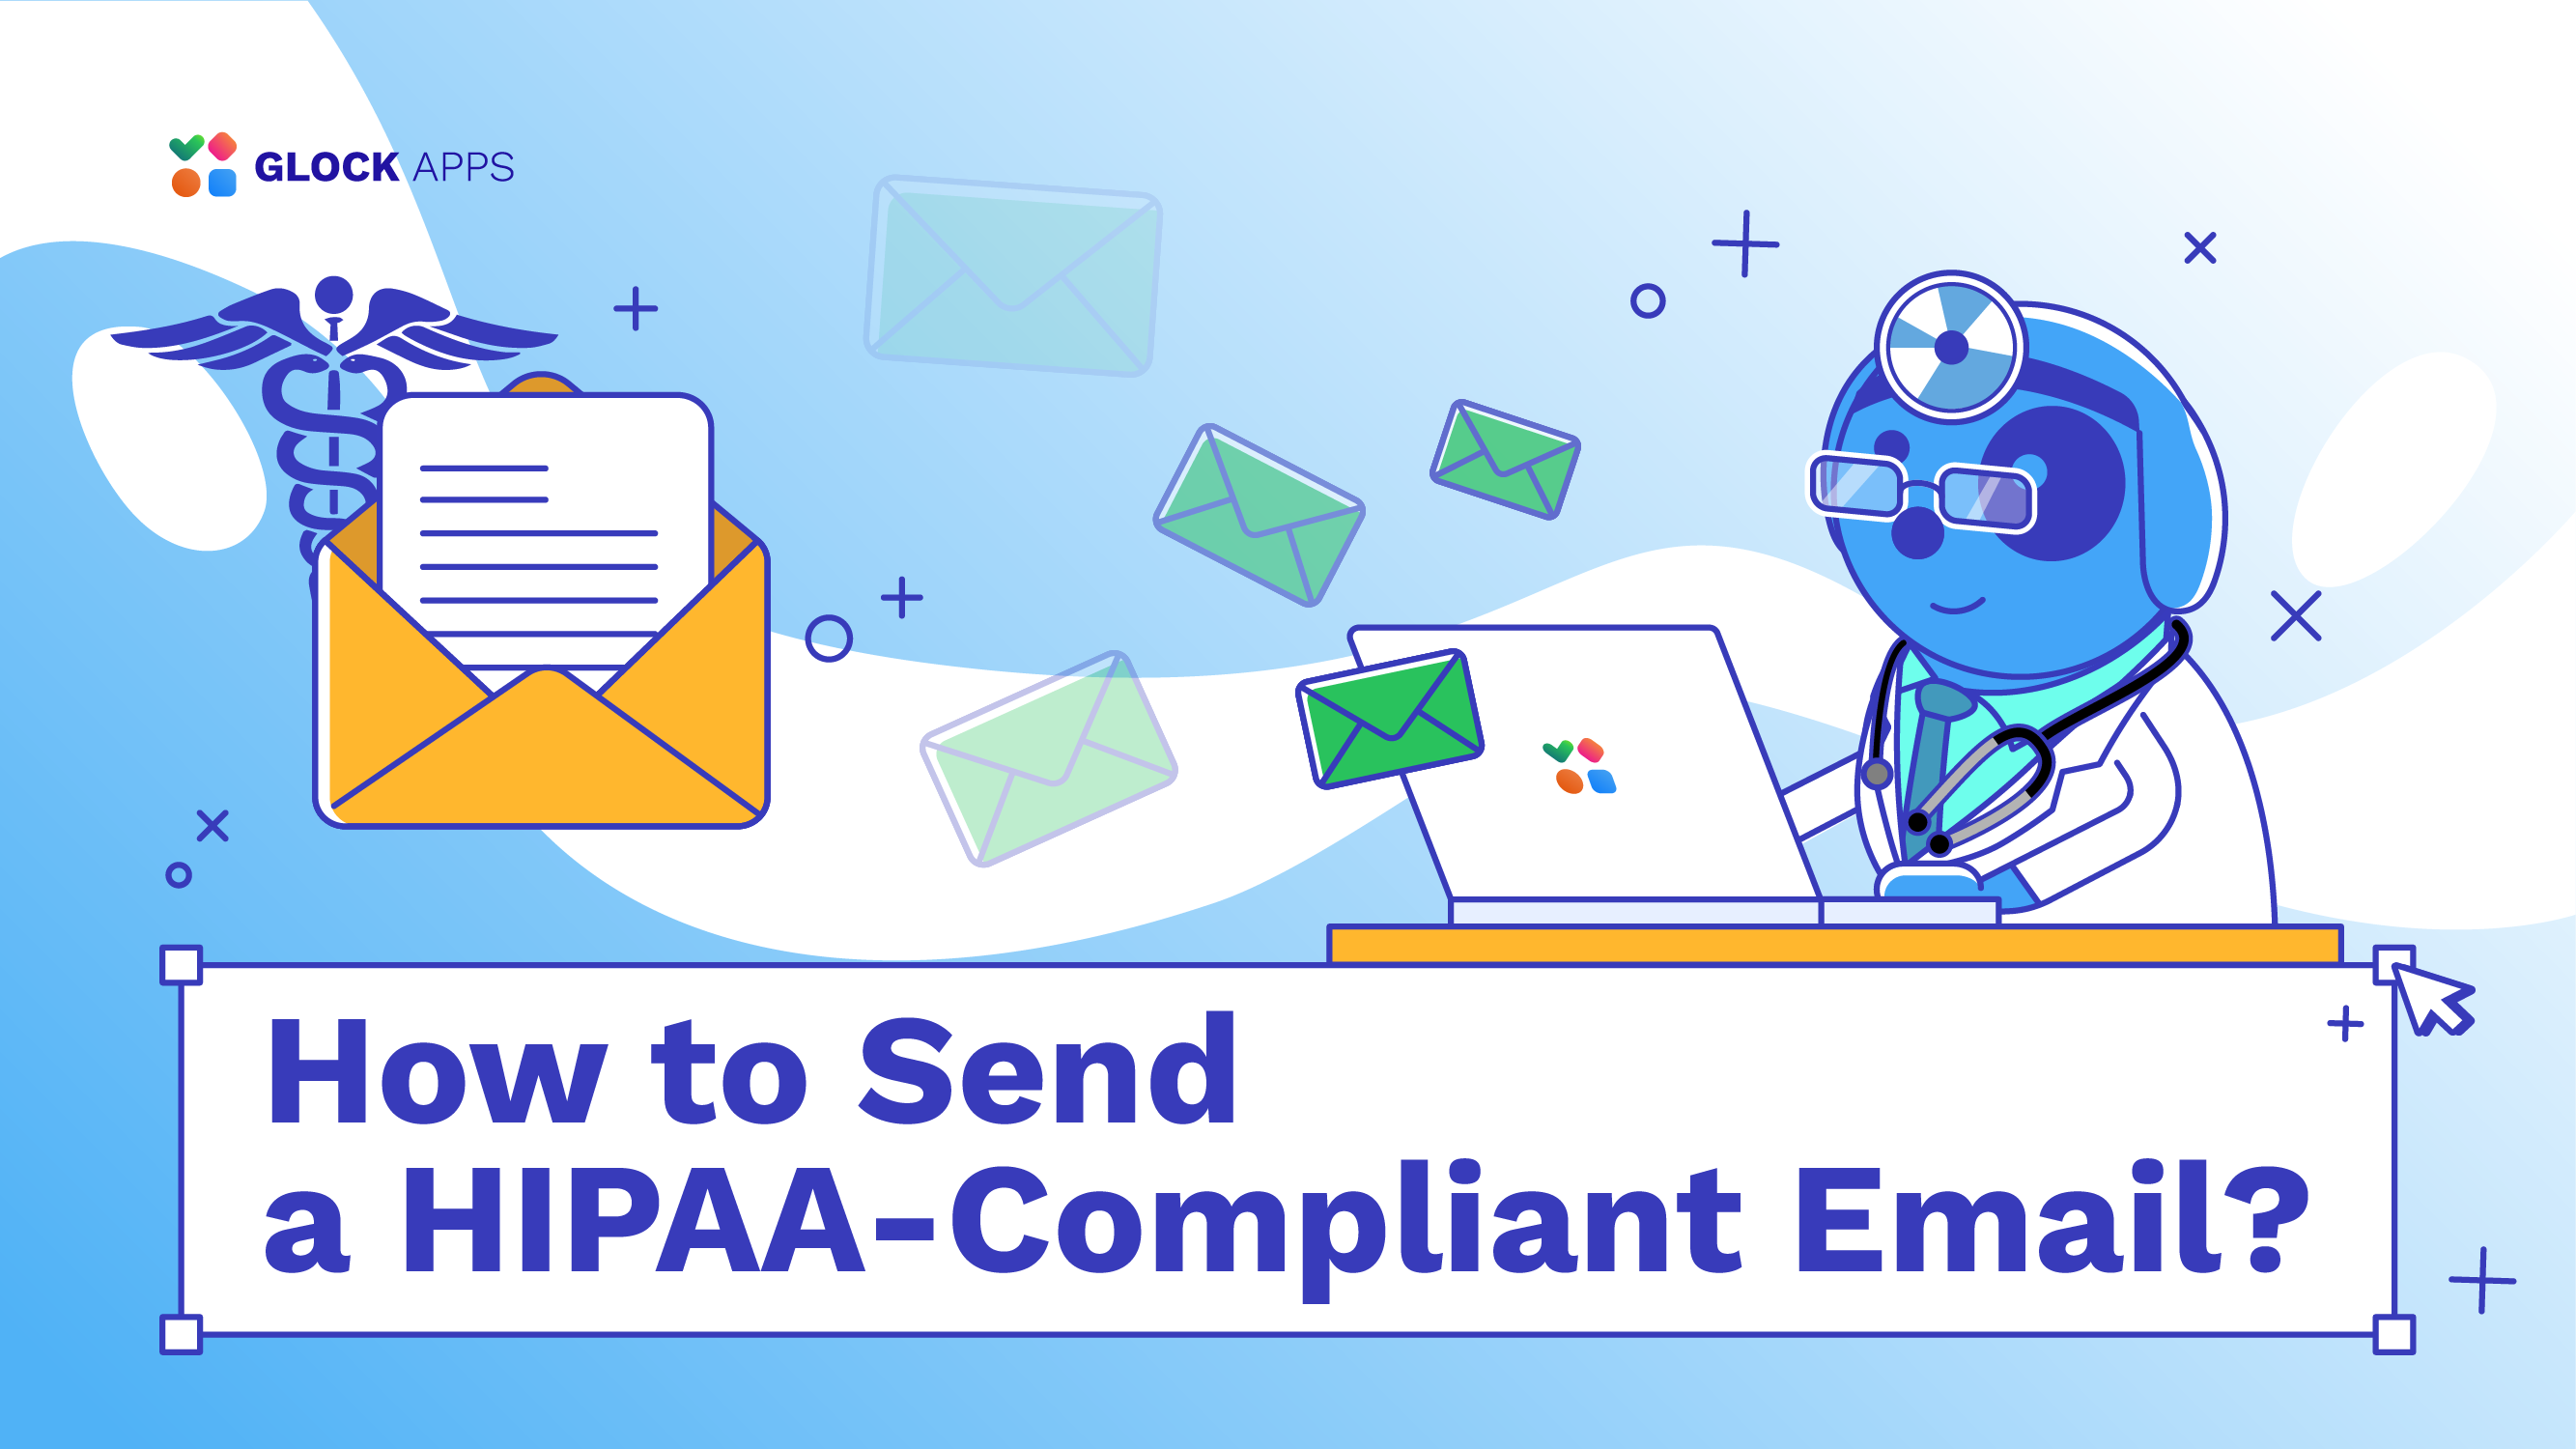 glockapps:-how-to-send-a-hipaa-compliant-email?